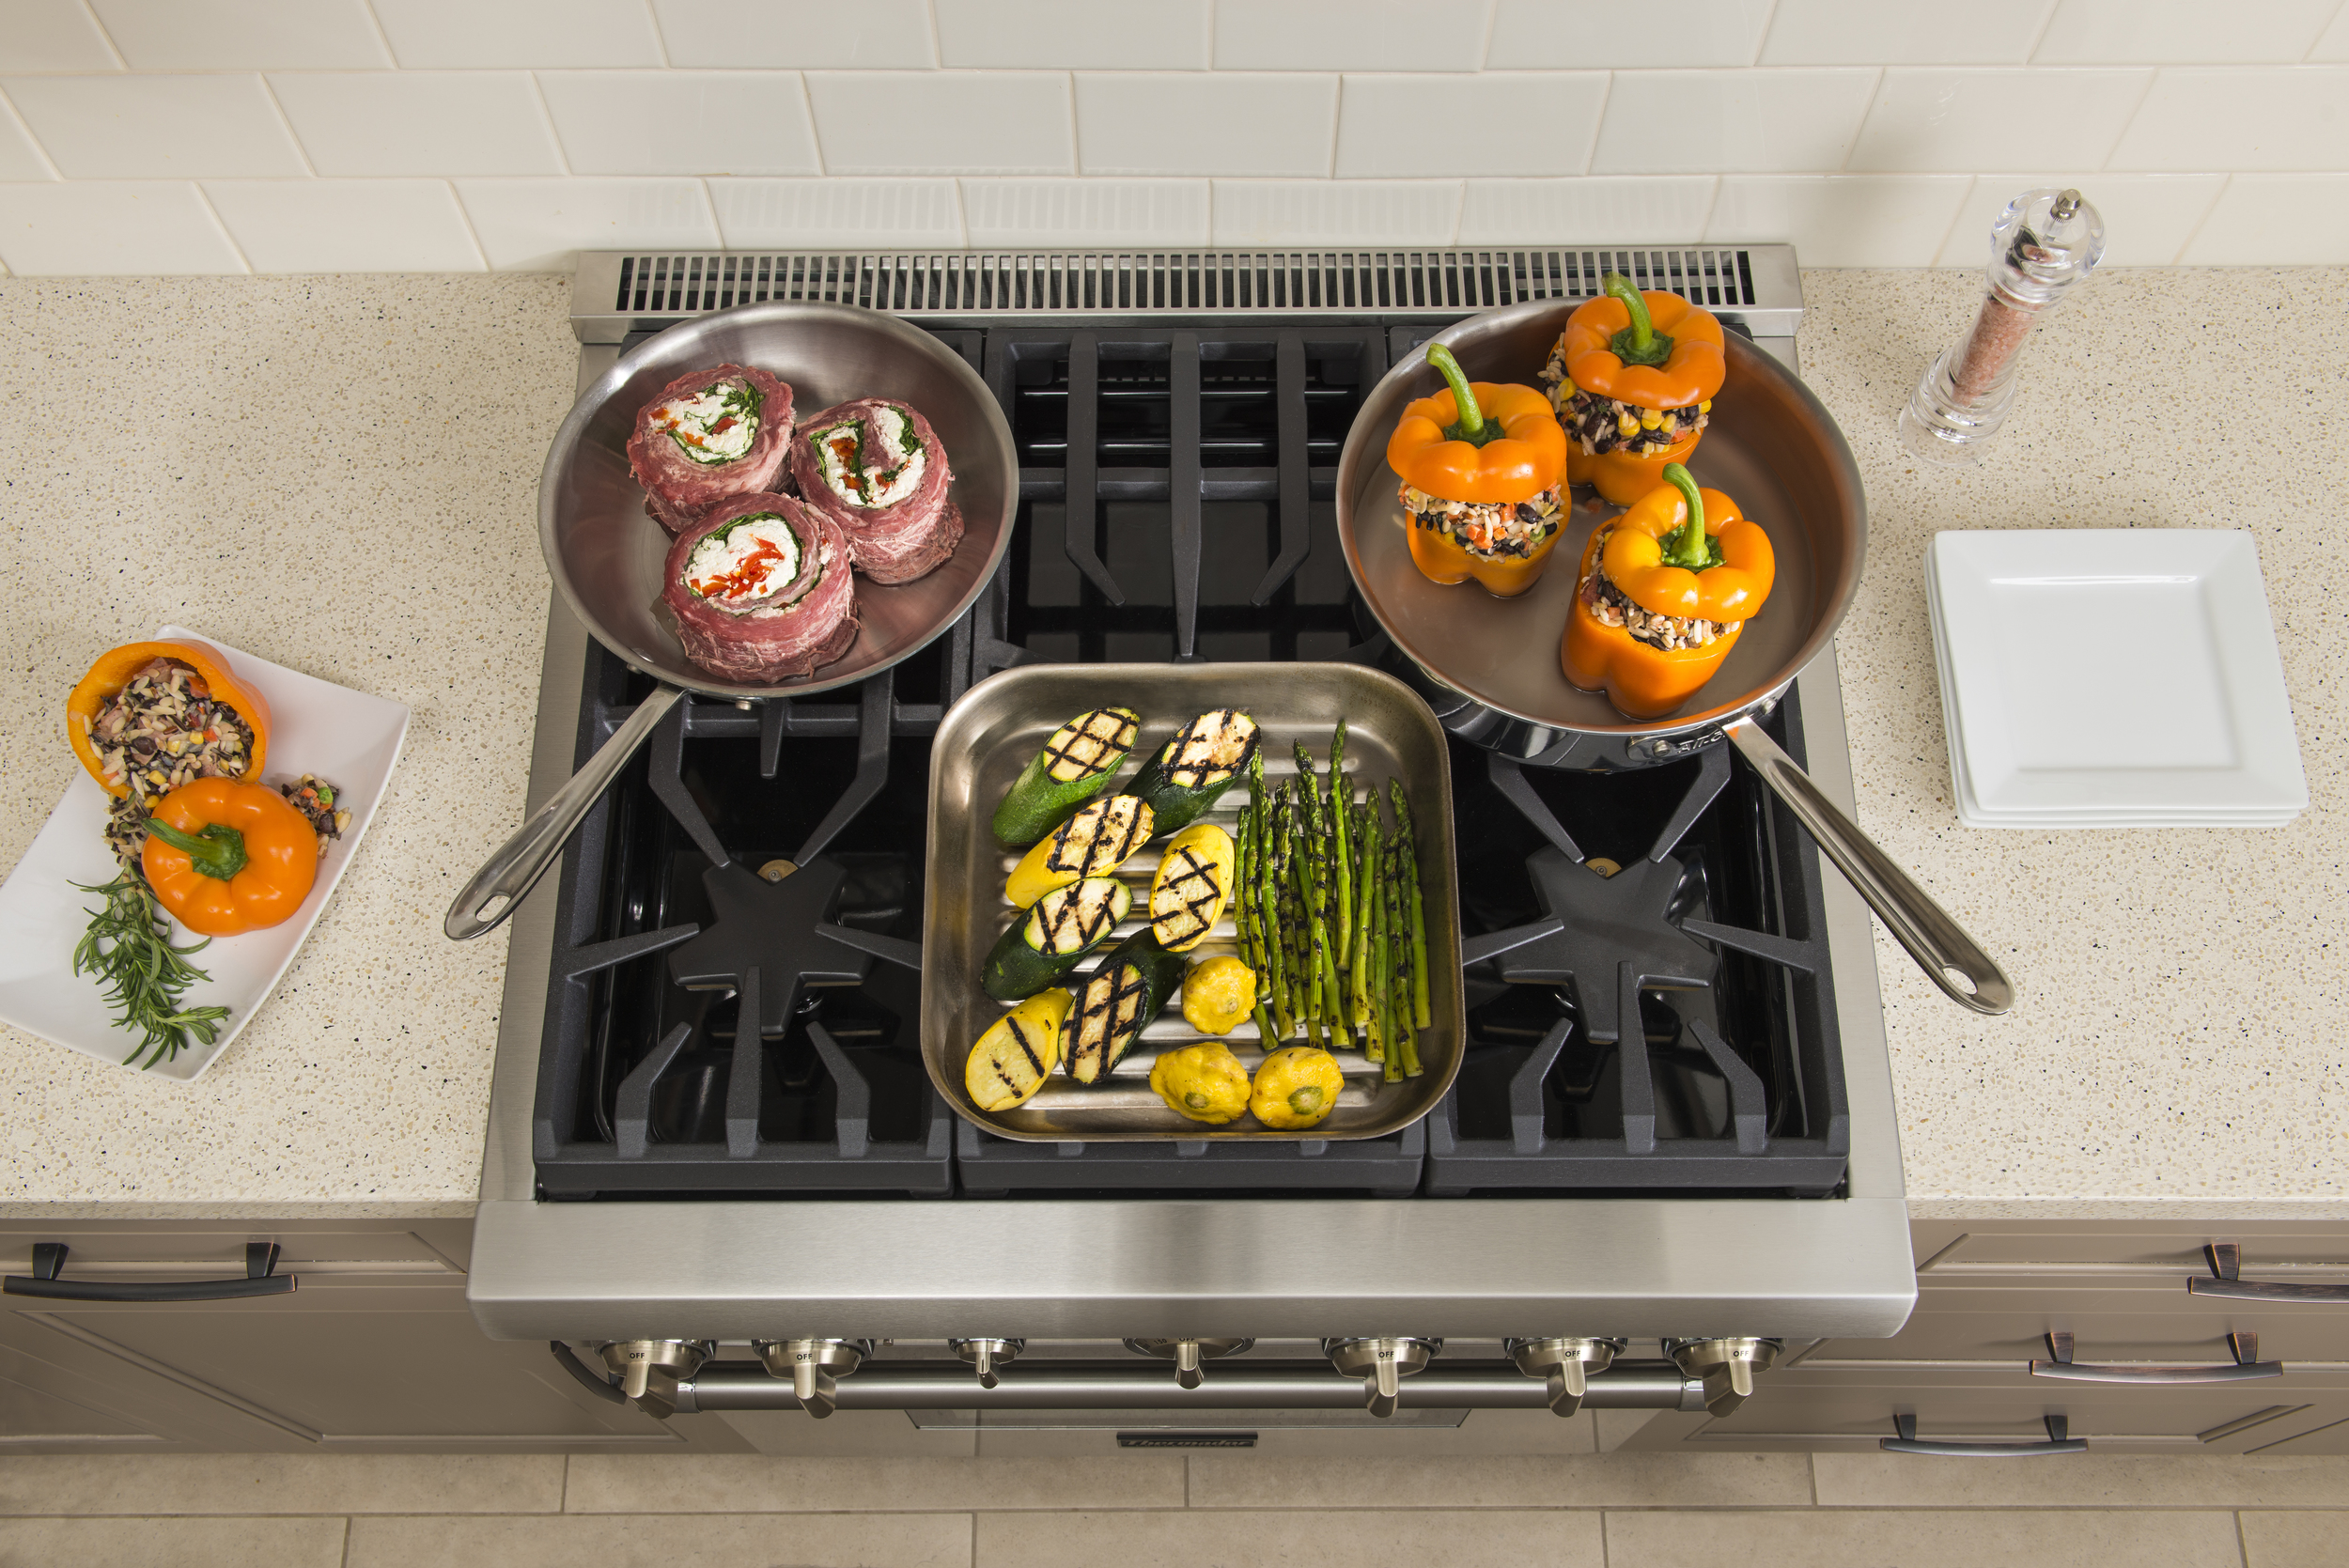 Best of #KBIS2015: Thermador's Five Burner Pro Harmony Range / cooking appliance | Carla Aston reporting from Modenus' #BlogTourVegas | Image via: Thermador.com